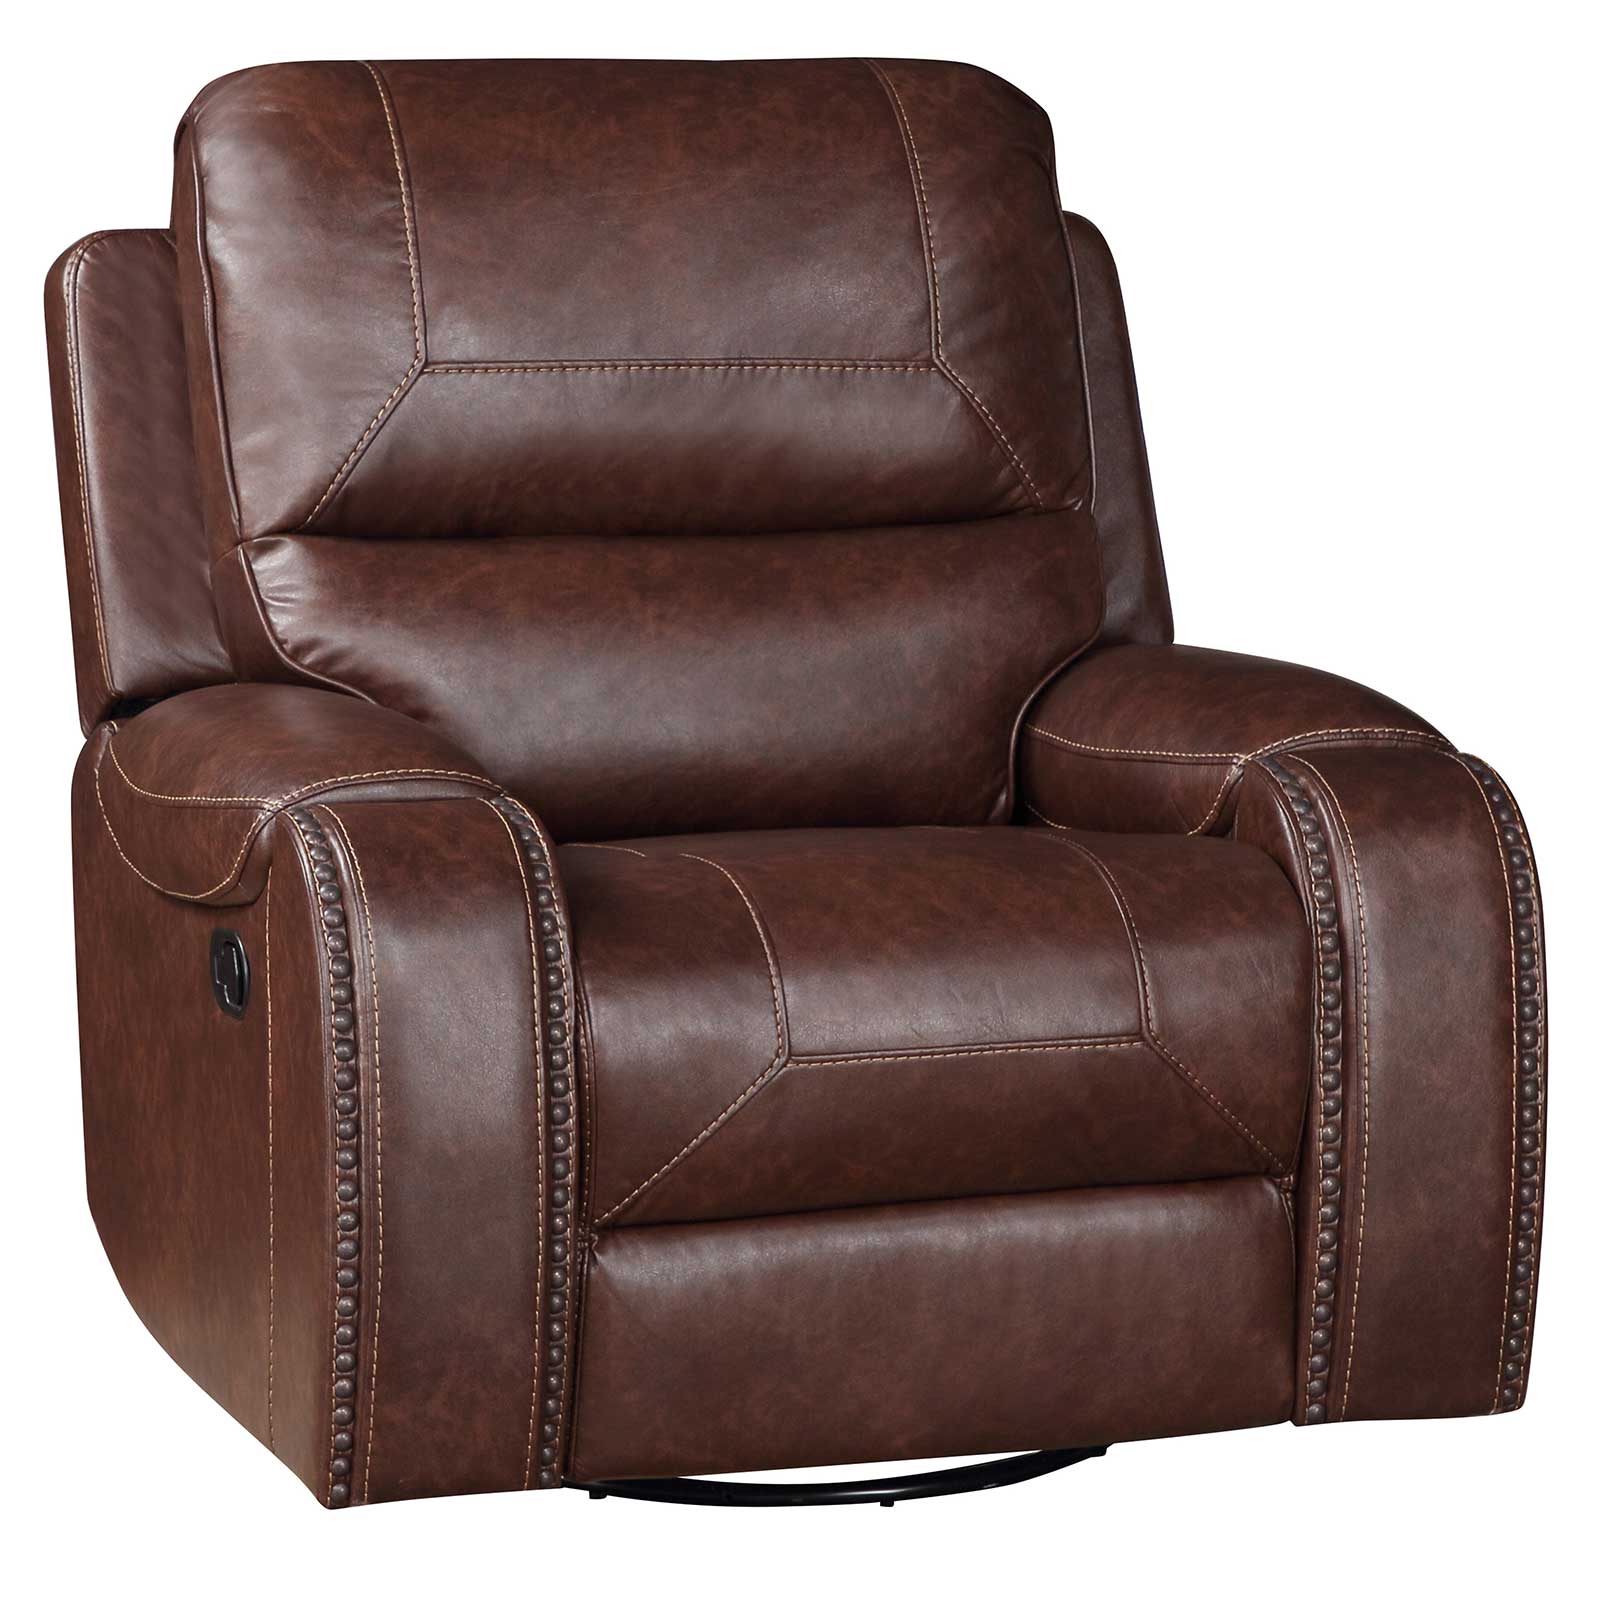 Steve Silver Co. Keily Manual Motion Swivel Glider Recliner Chair